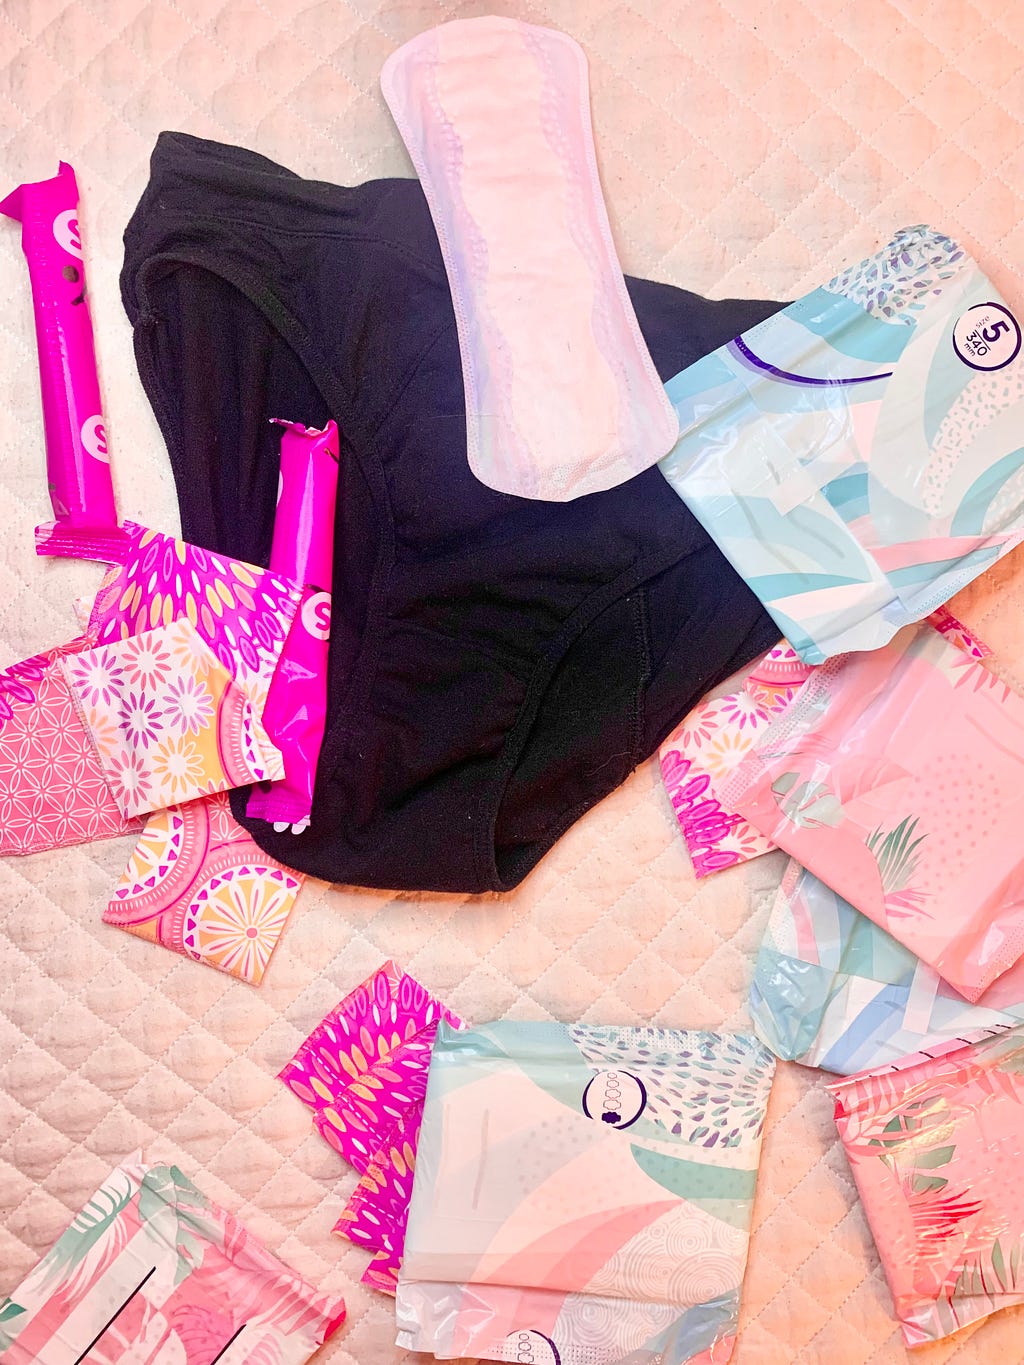 A variety of blue and pink floral print pads, tampons and dark coloured period panties randomly sprawled out across a white background